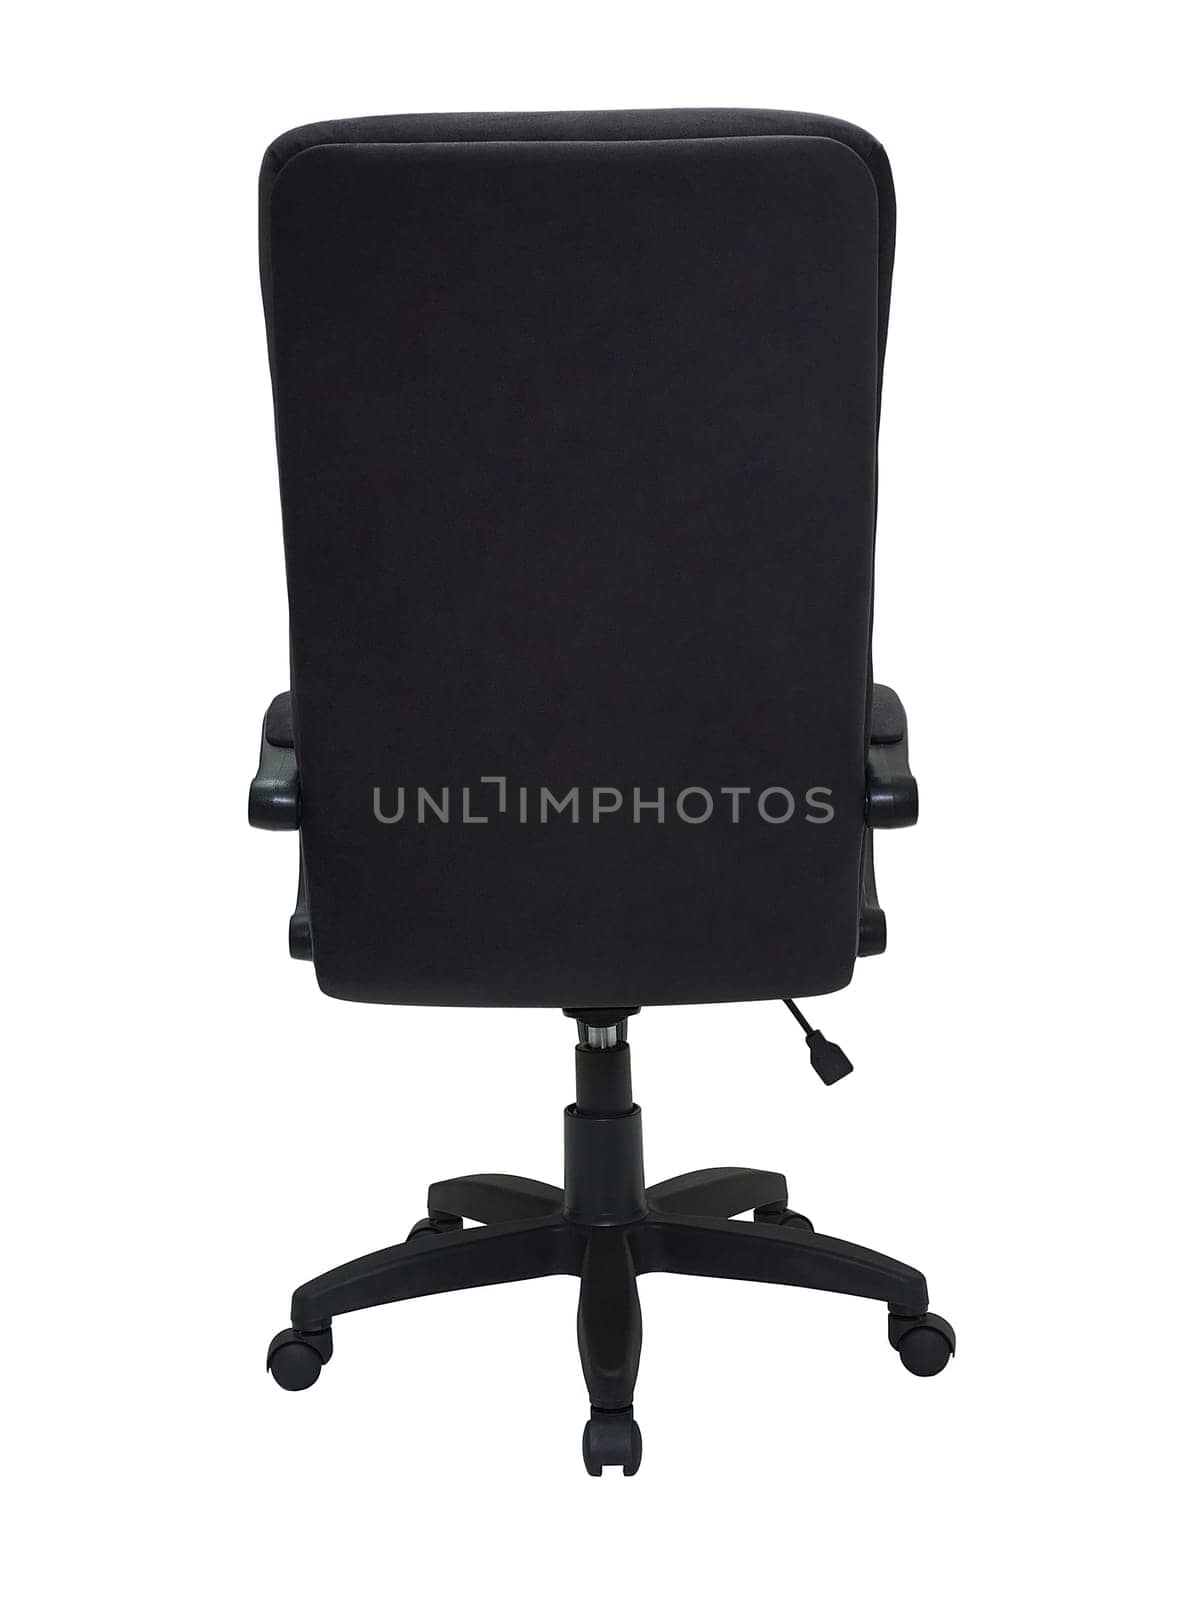 black fabric armchair on wheels isolated on white background, back view. modern furniture in minimal style, interior, home design